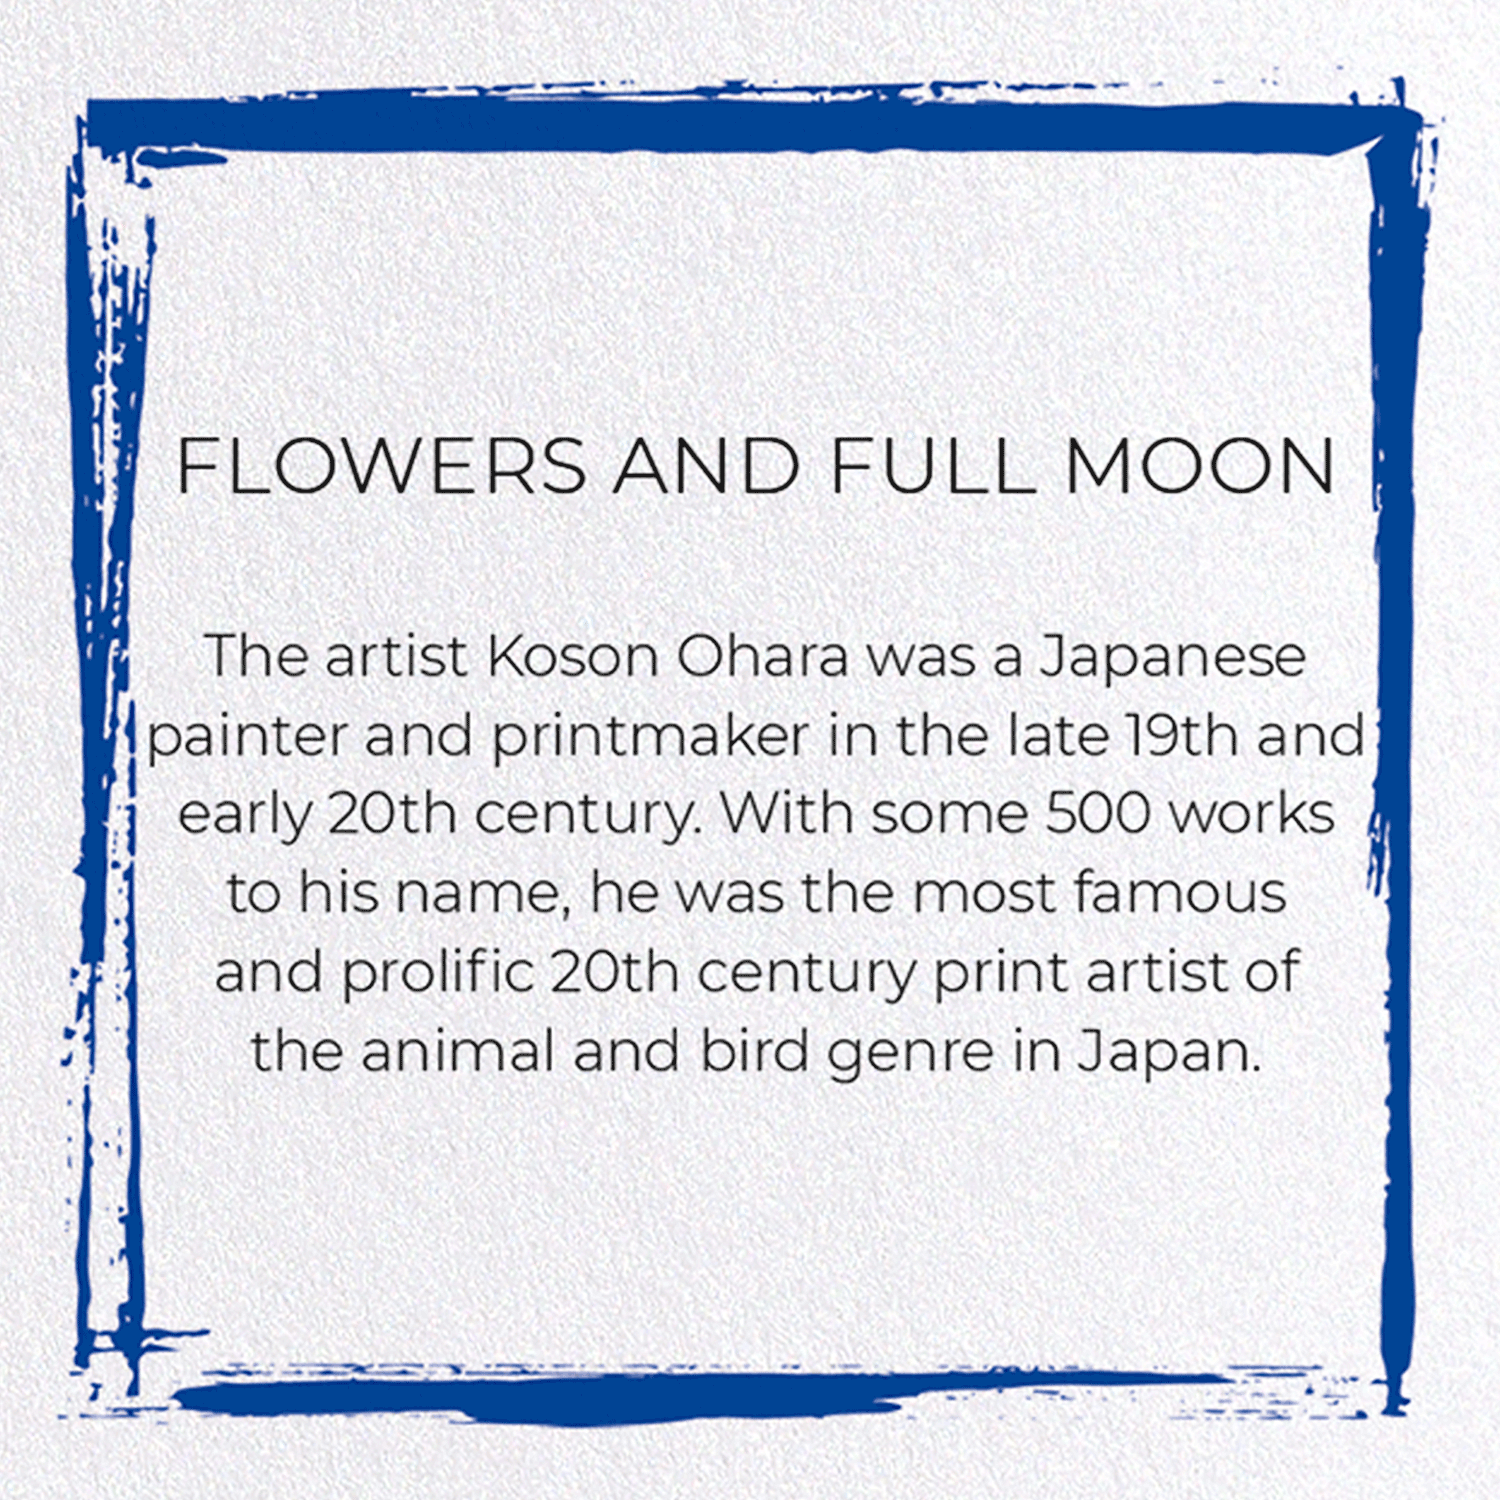 FLOWERS AND FULL MOON